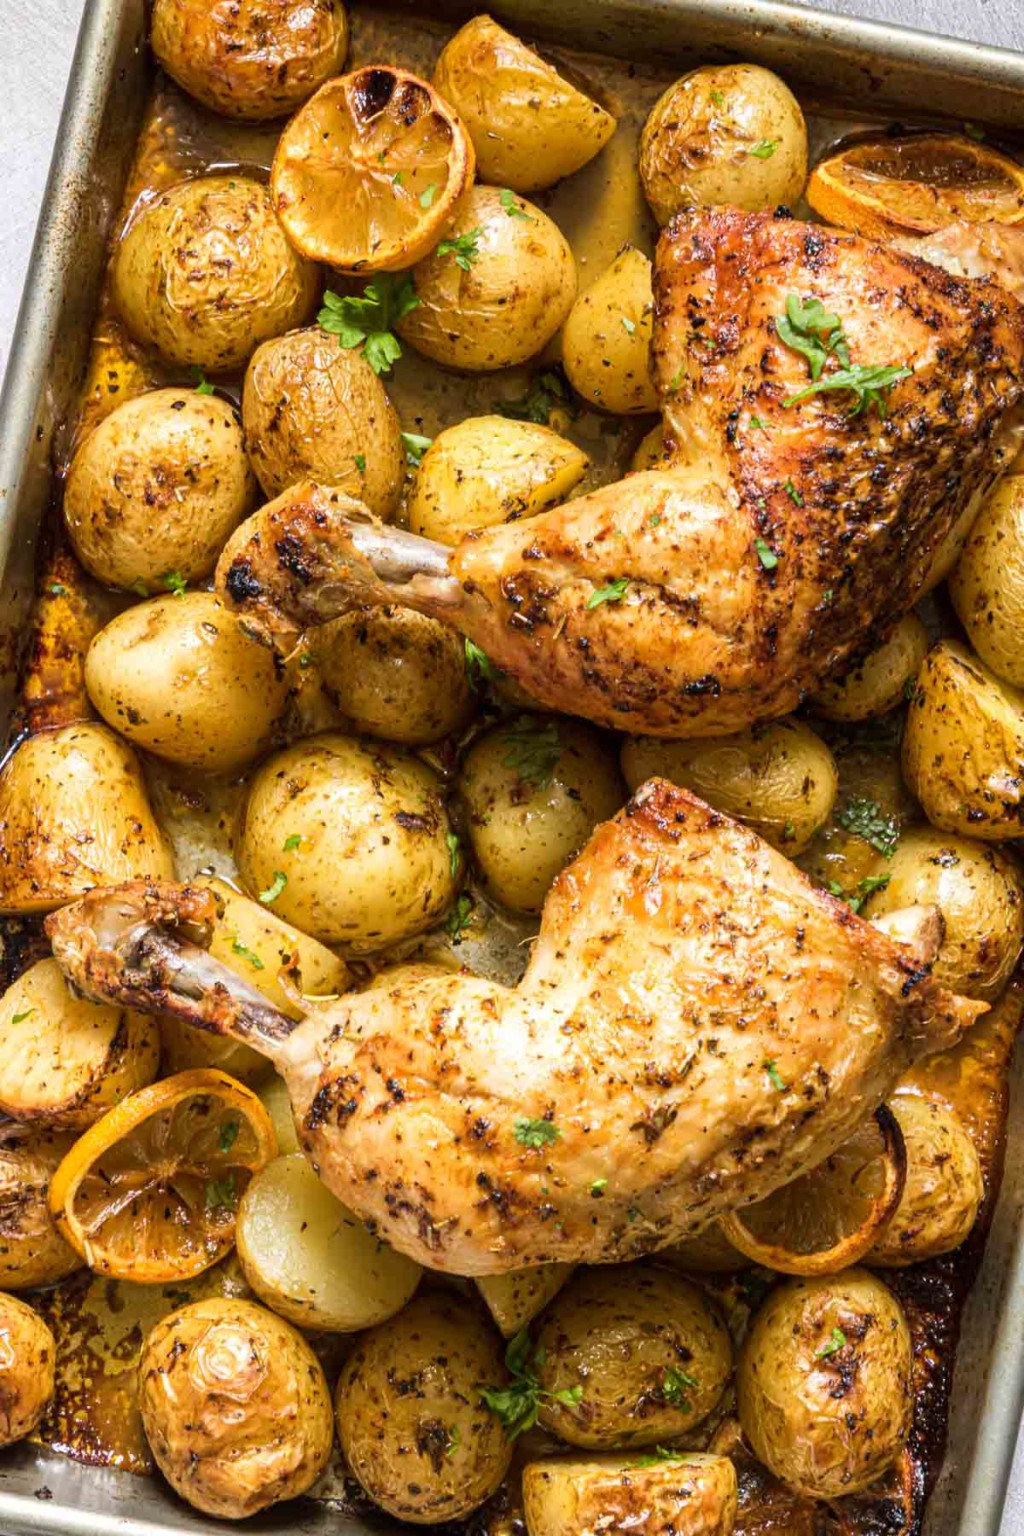 Baked Chicken Leg Quarters - Recipes From A Pantry